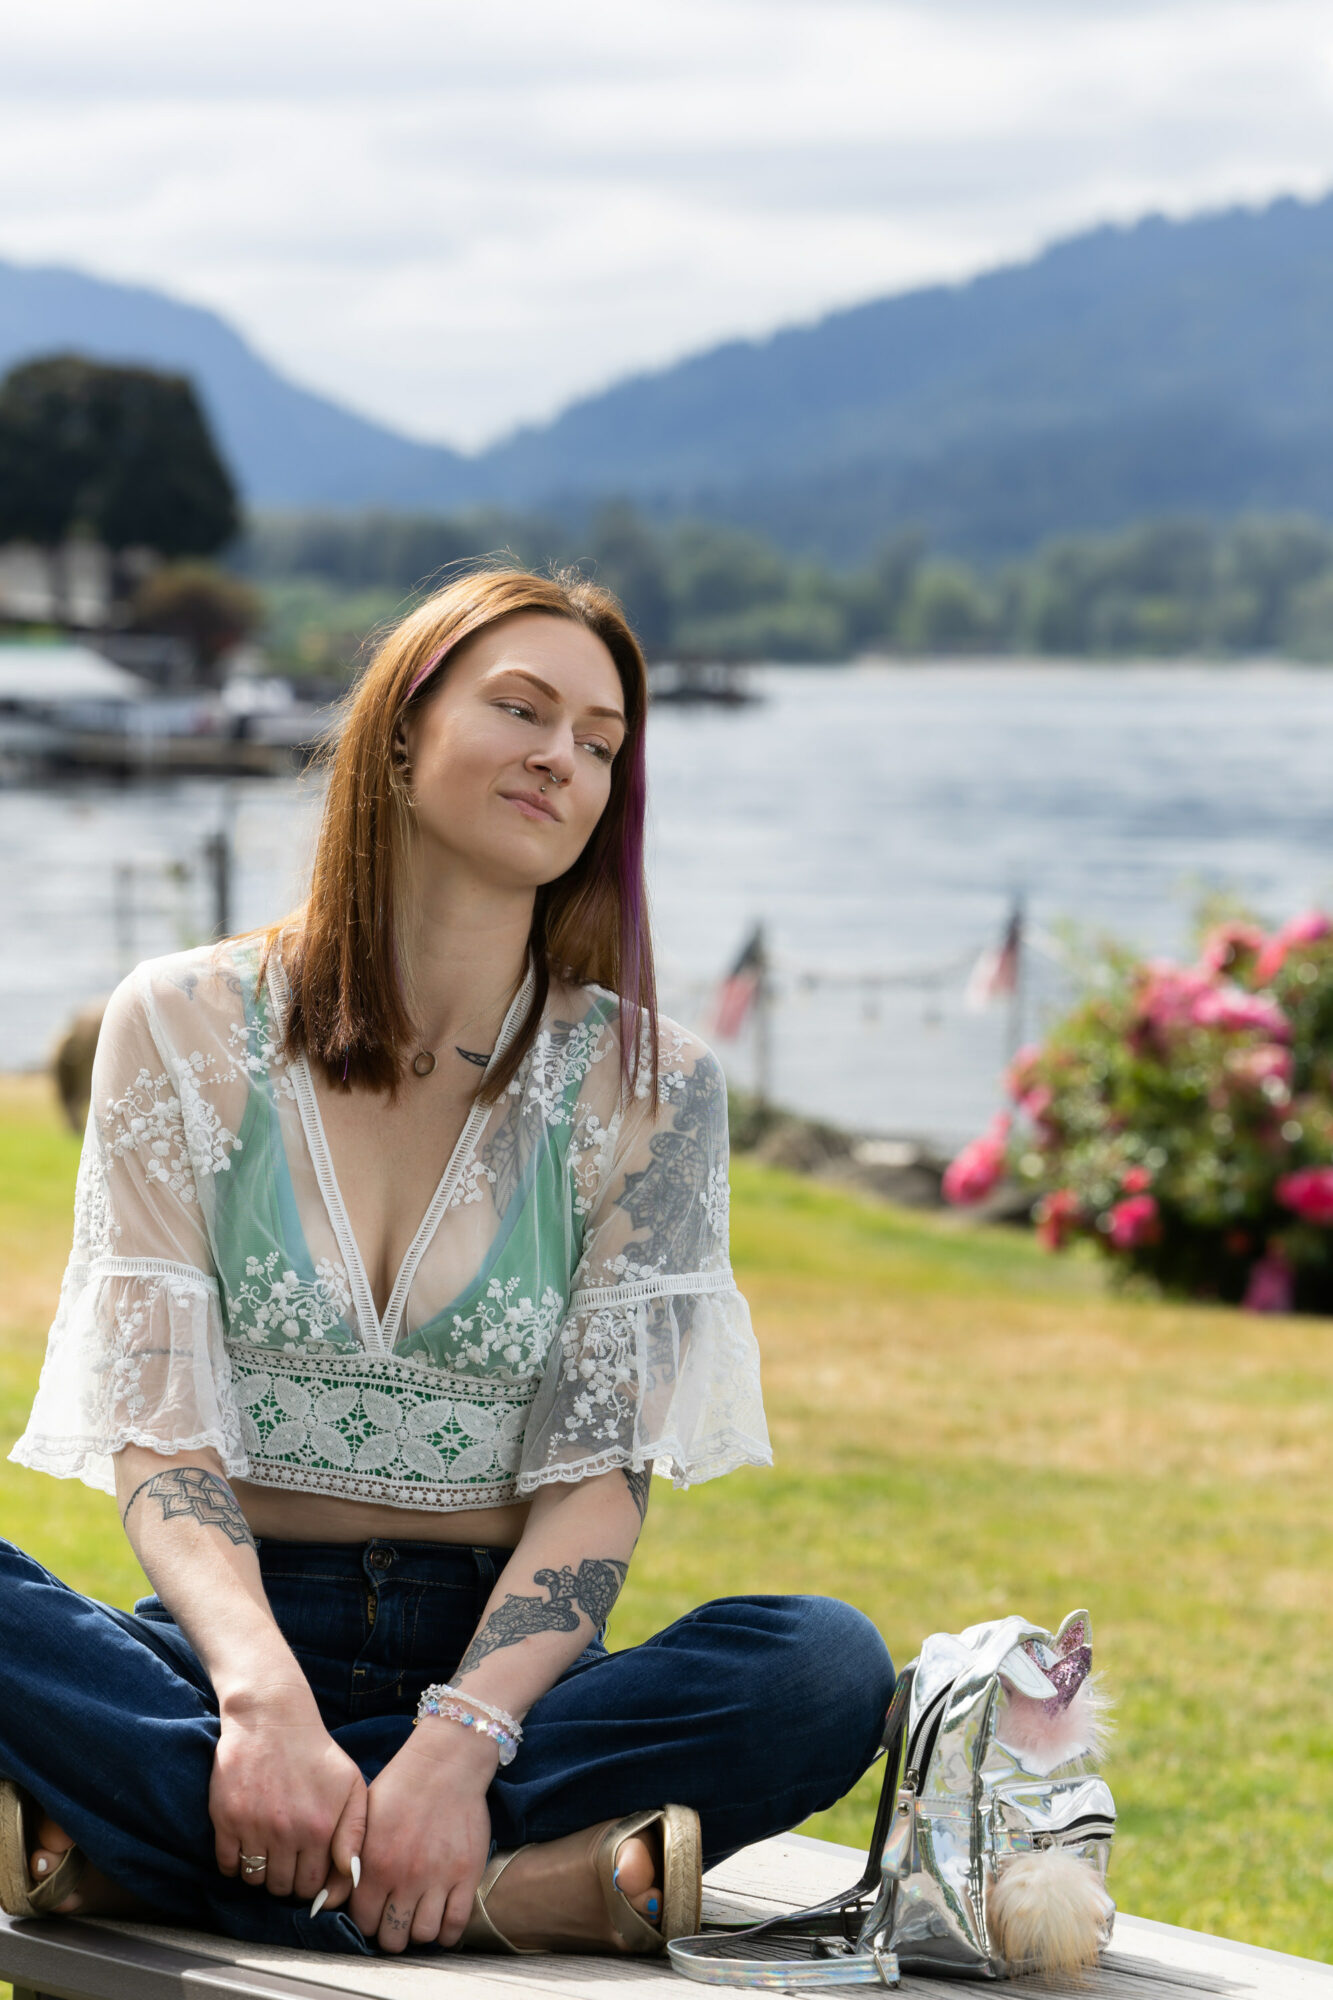 Empowered Voices member wearing a lace and green top and blue jeans, on grass with lake and mountains in the backgrouns